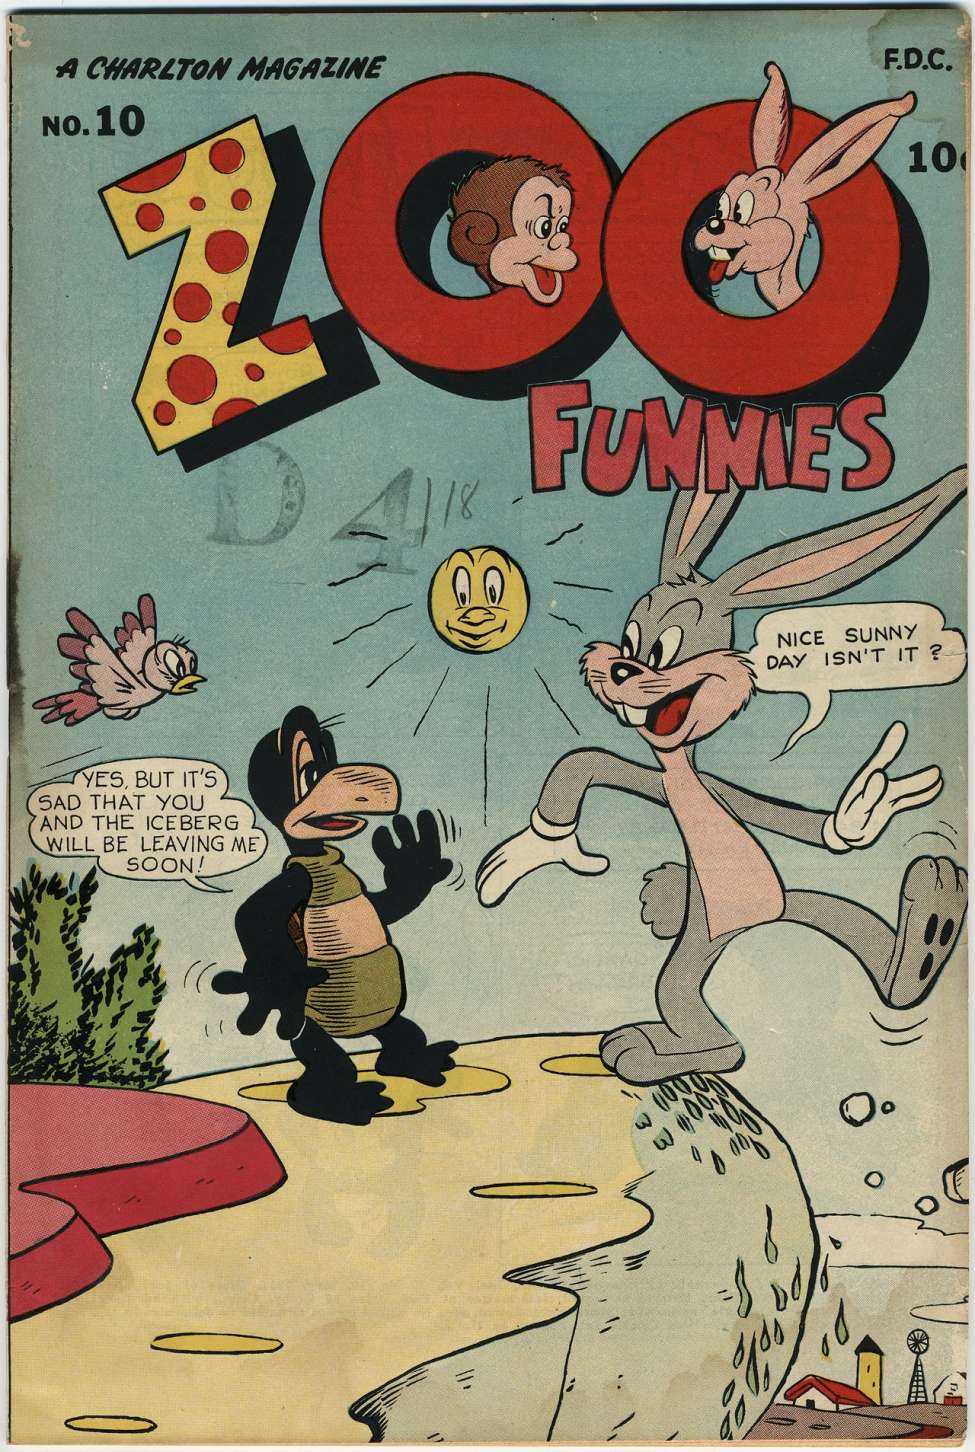 Comic Book Cover For Zoo Funnies v1 10